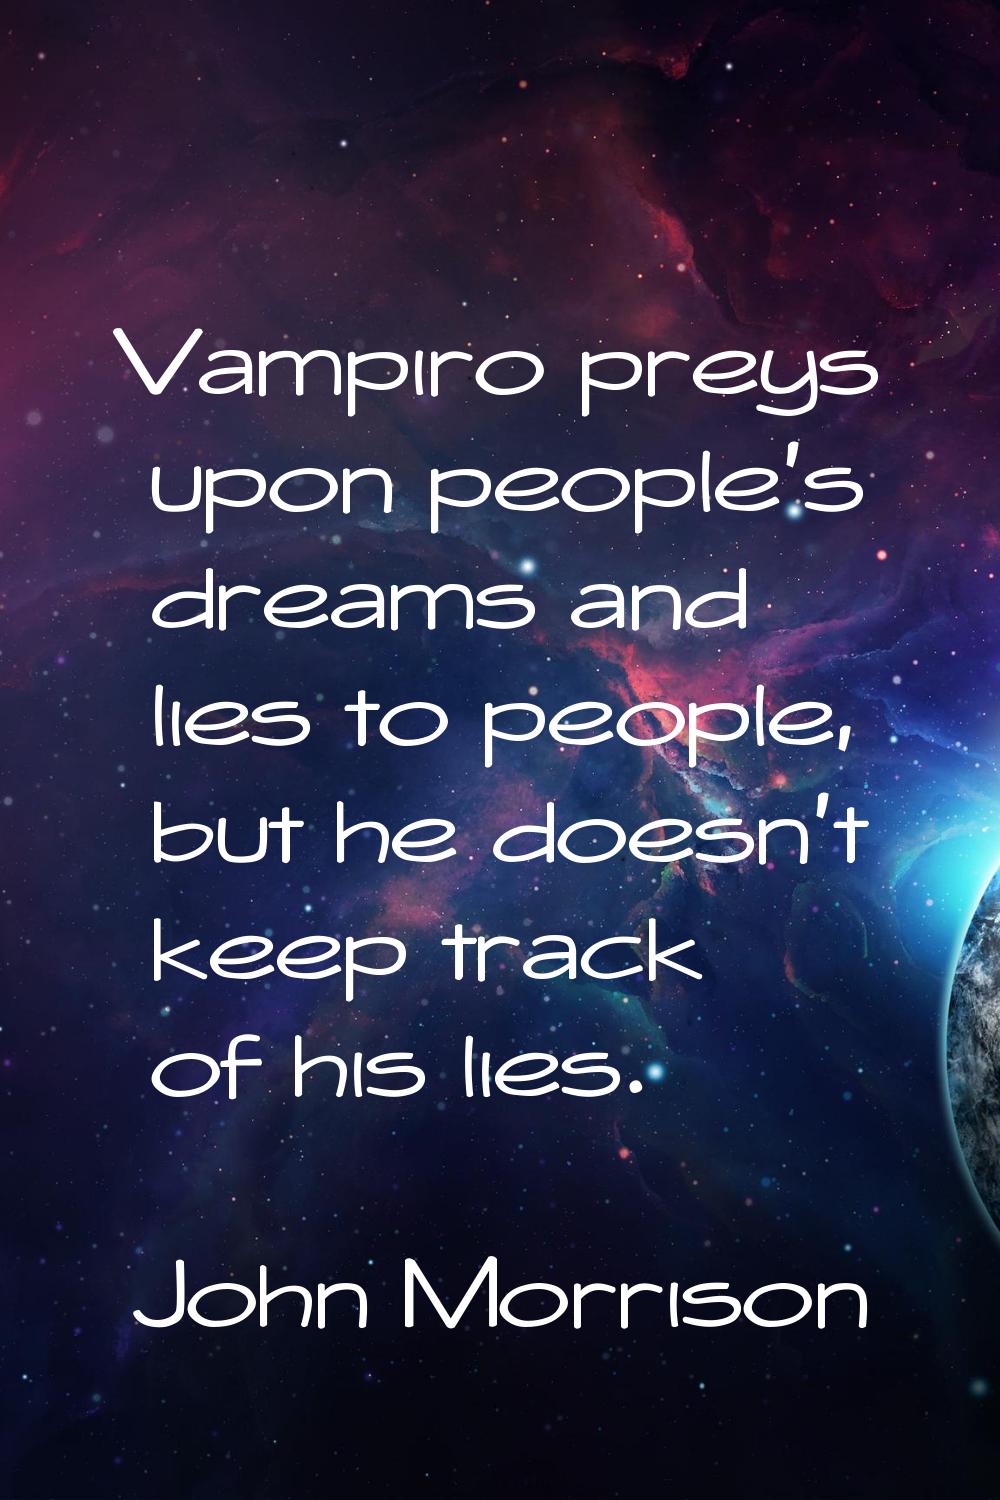 Vampiro preys upon people's dreams and lies to people, but he doesn't keep track of his lies.